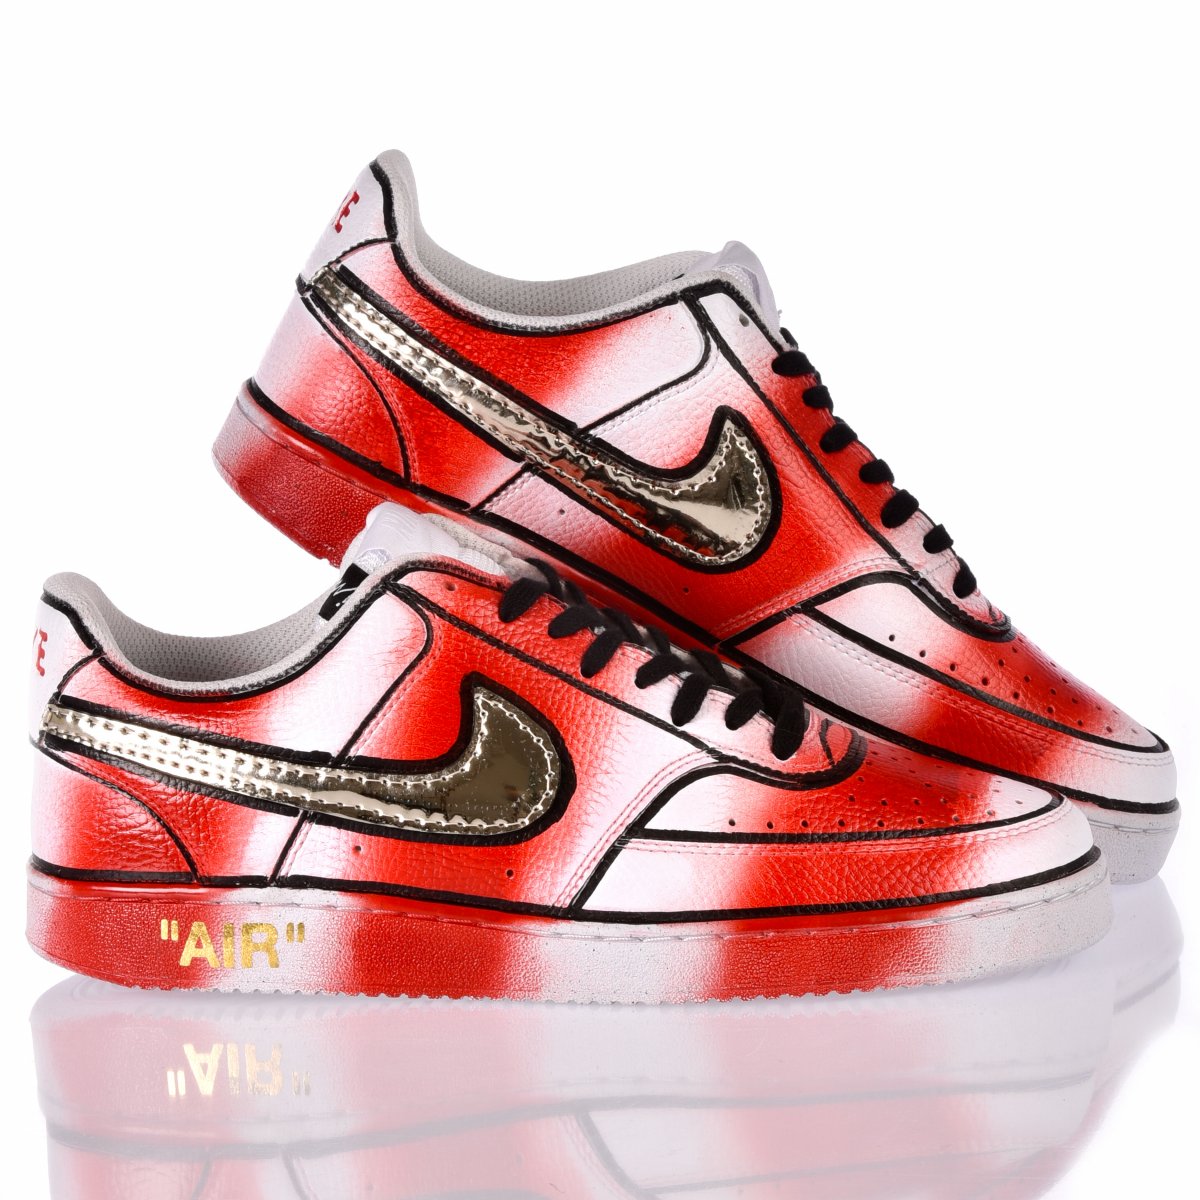 Nike Red Claus Air Force Vision Special